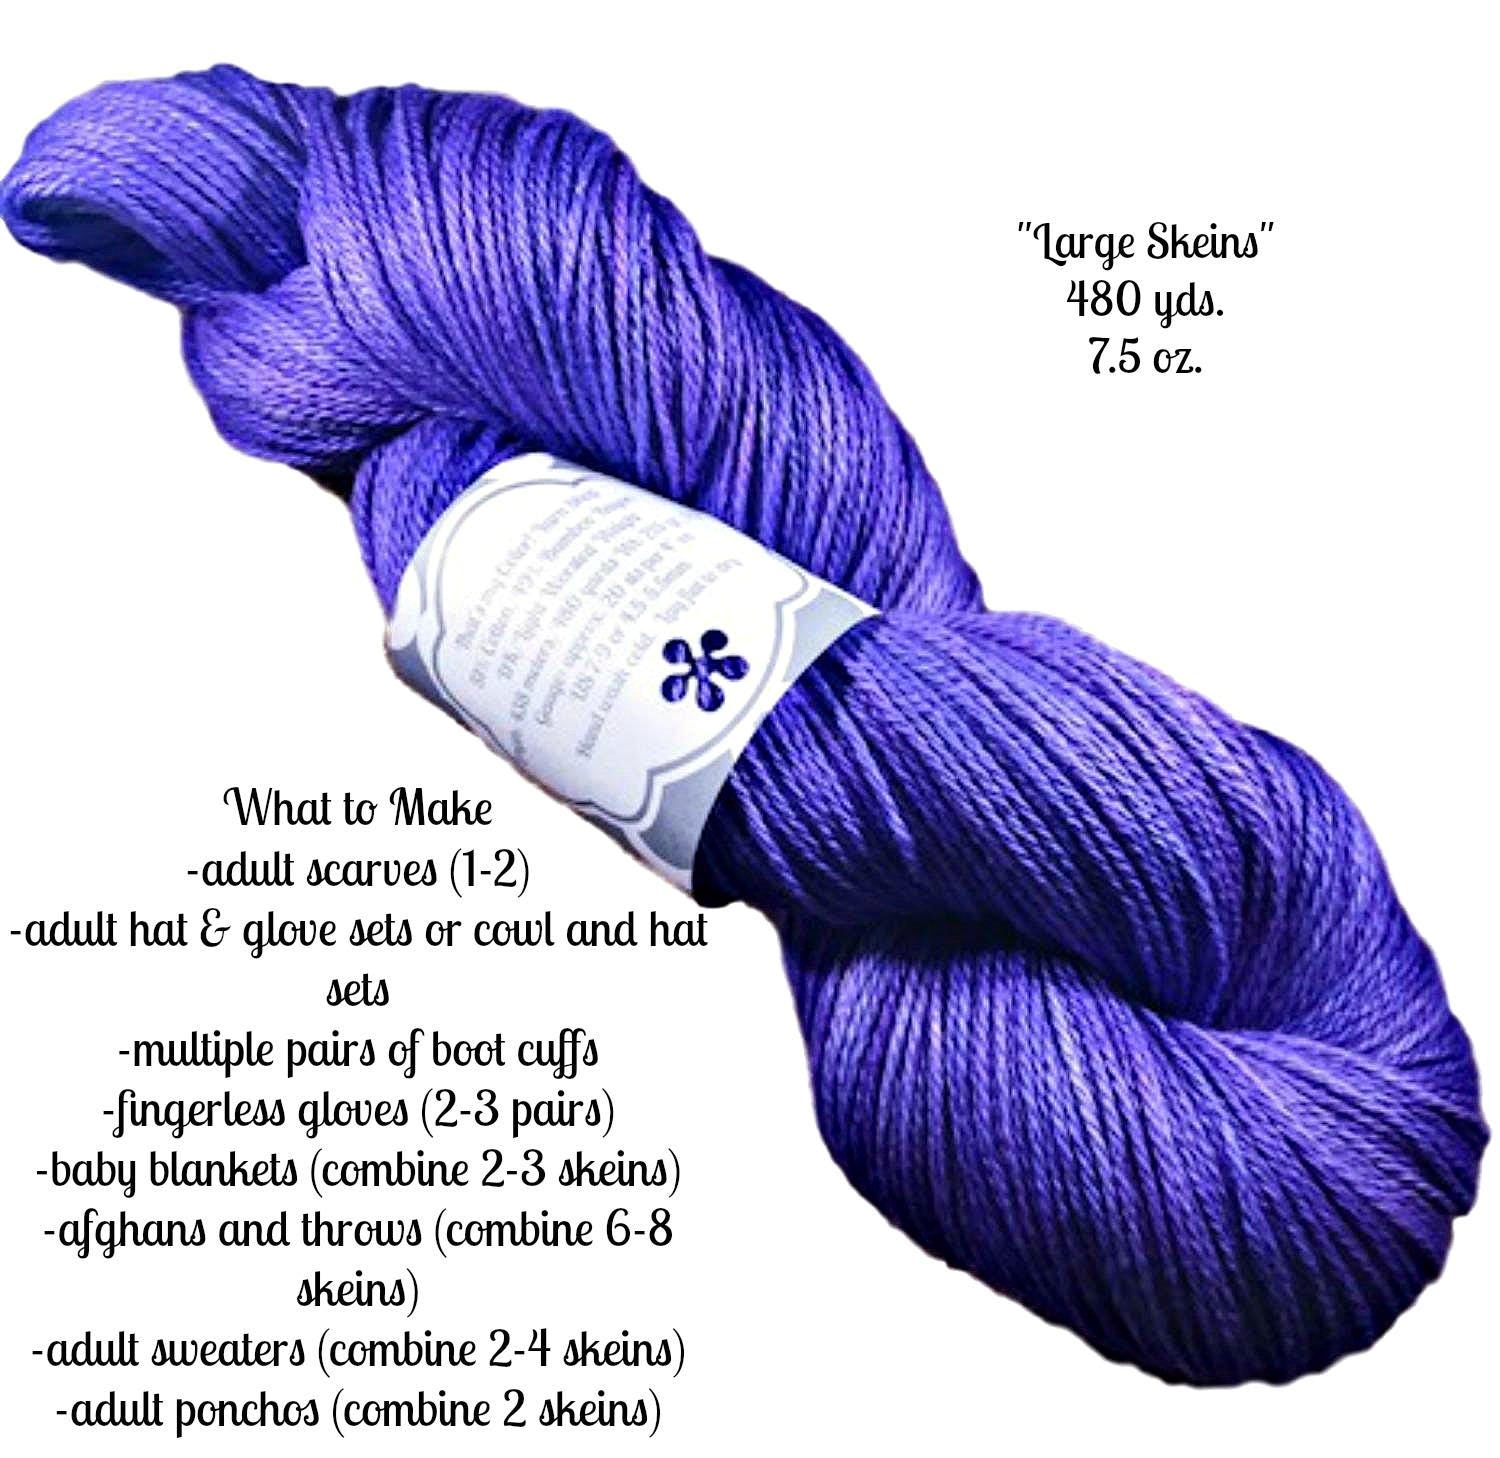 Indie Dyed Yarn Kit - Blue to Purple Gradient - Plant Based - Hand Dyed - Semi Solids - Bamboo Cotton - DK Light Worsted 3 Ply - Vegan